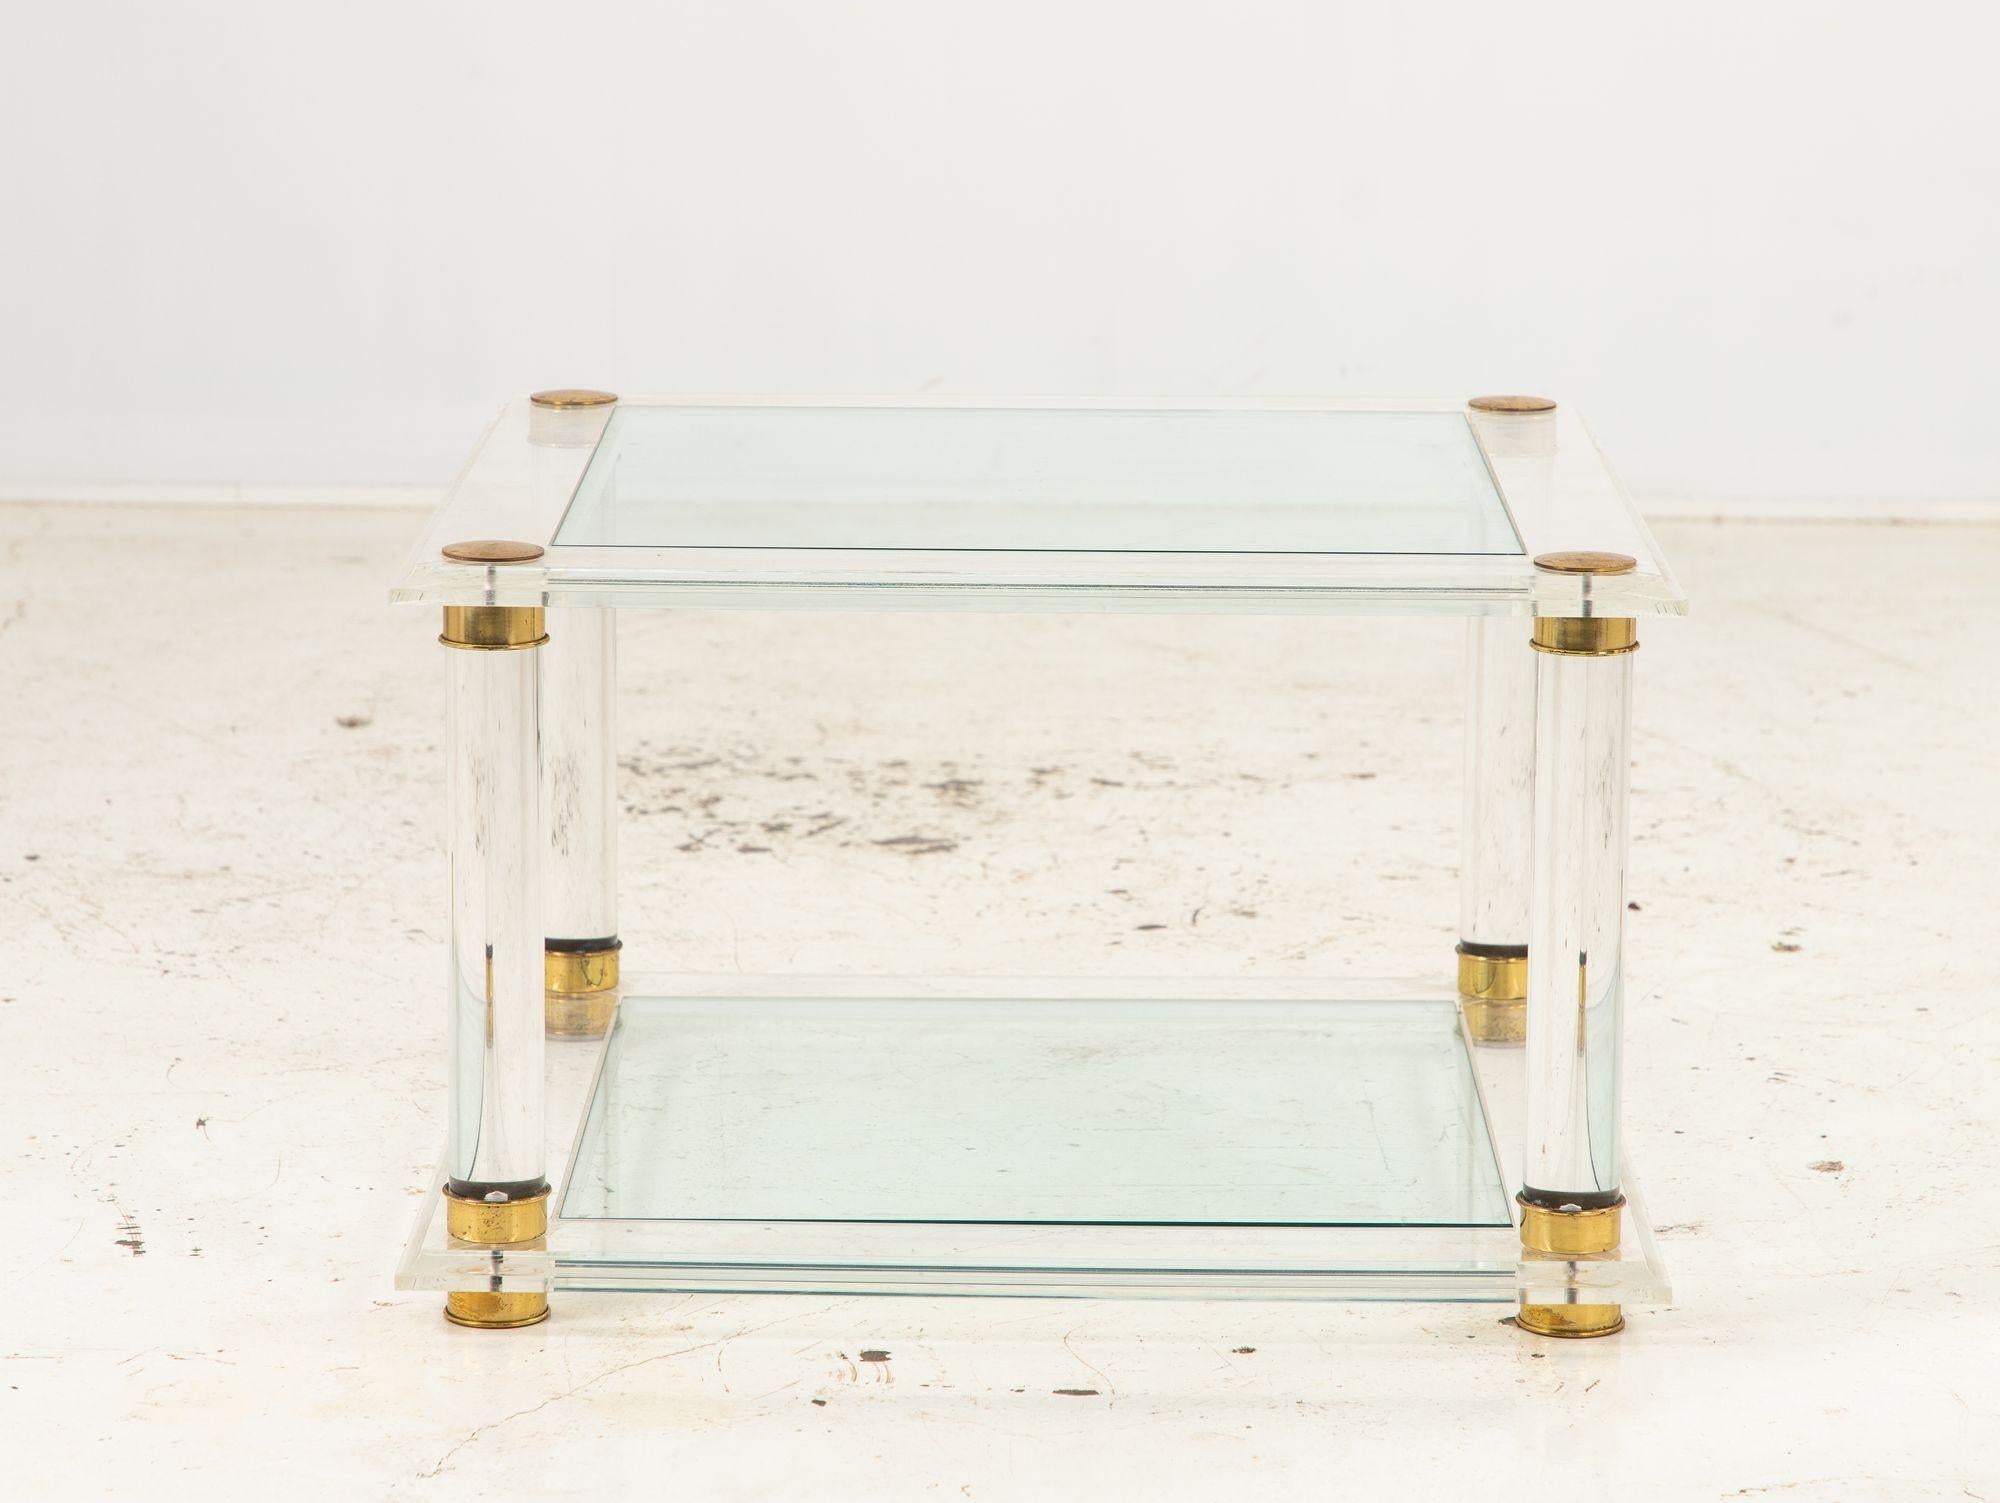 Transport yourself back to the stylish 1970s with this exquisite Romeo Paris style square cocktail table. Crafted with a fusion of materials, it boasts a transparent Lucite frame that exude an air of modernity, supporting a sleek glass top that adds